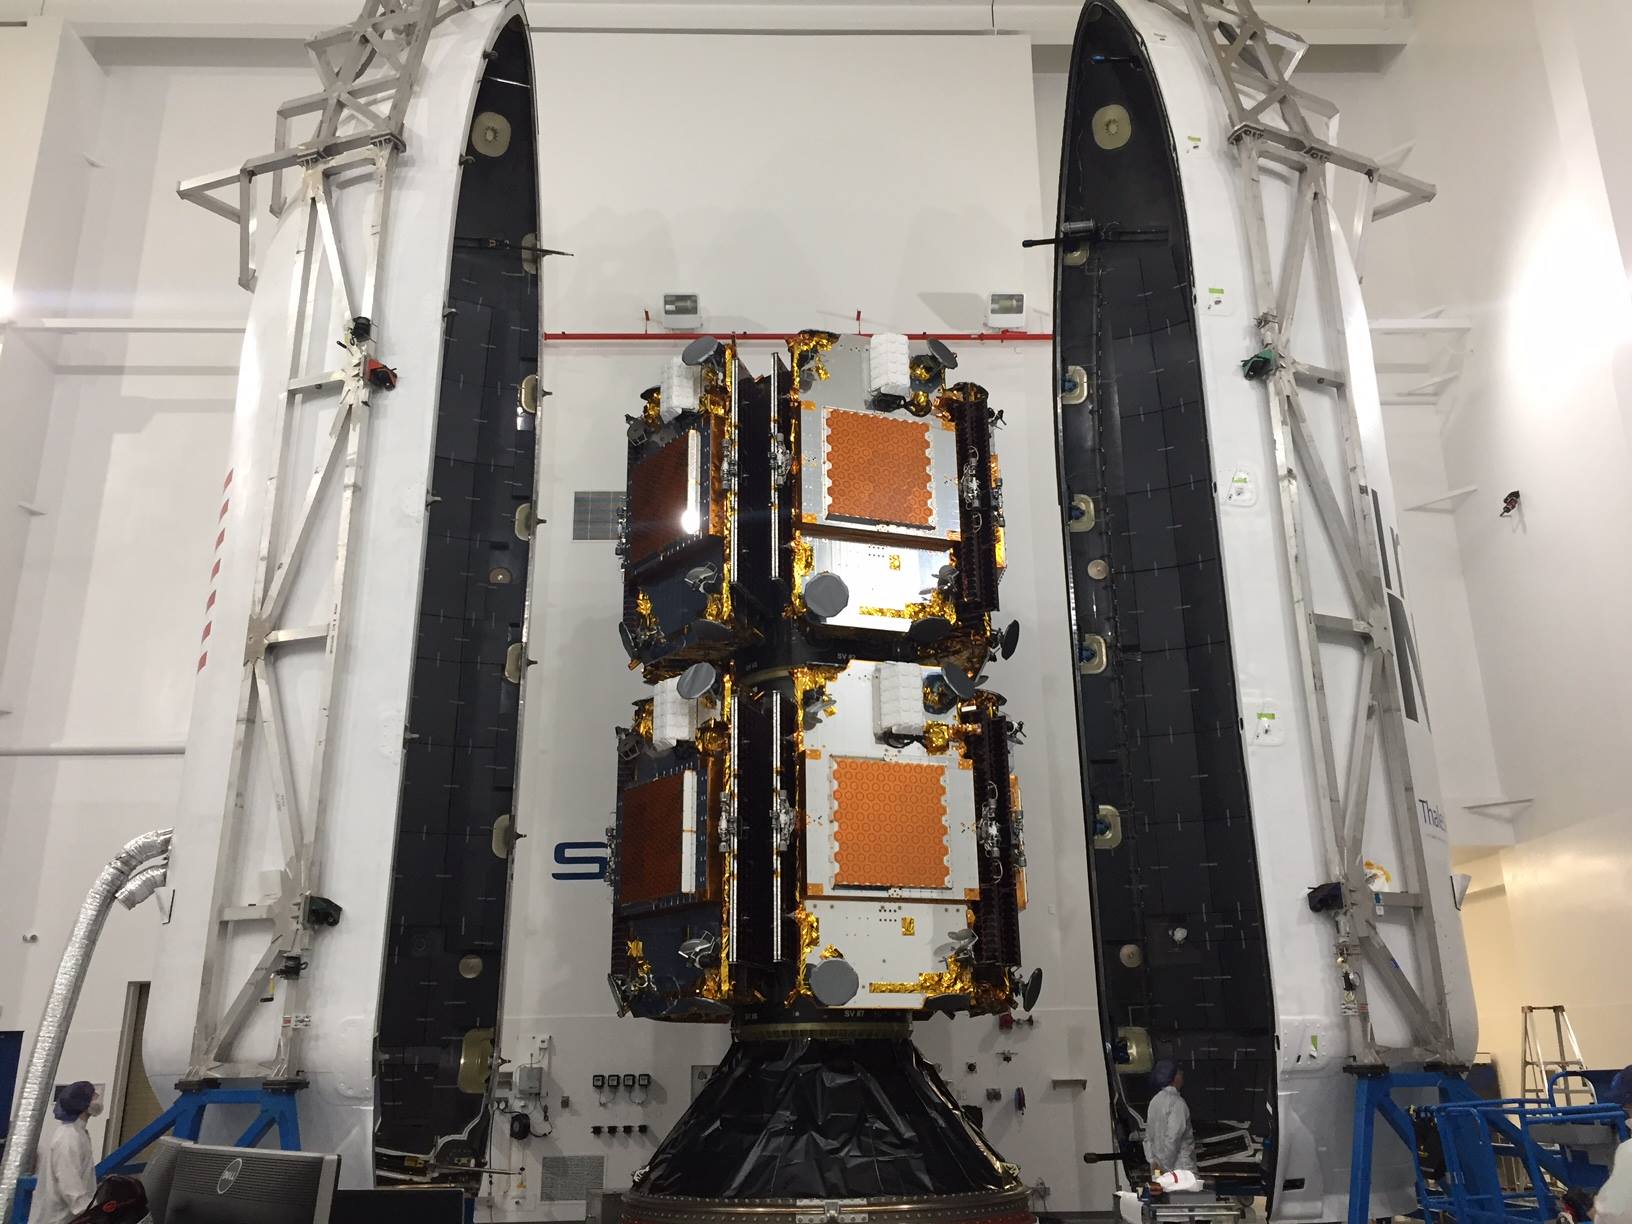 The first ten IridiumNEXT satellites are stacked and encapsulated in the Falcon 9 fairing for a Jan. 8 launch attempt from Vandenberg AFB, CA. Photo Credit: Iridium